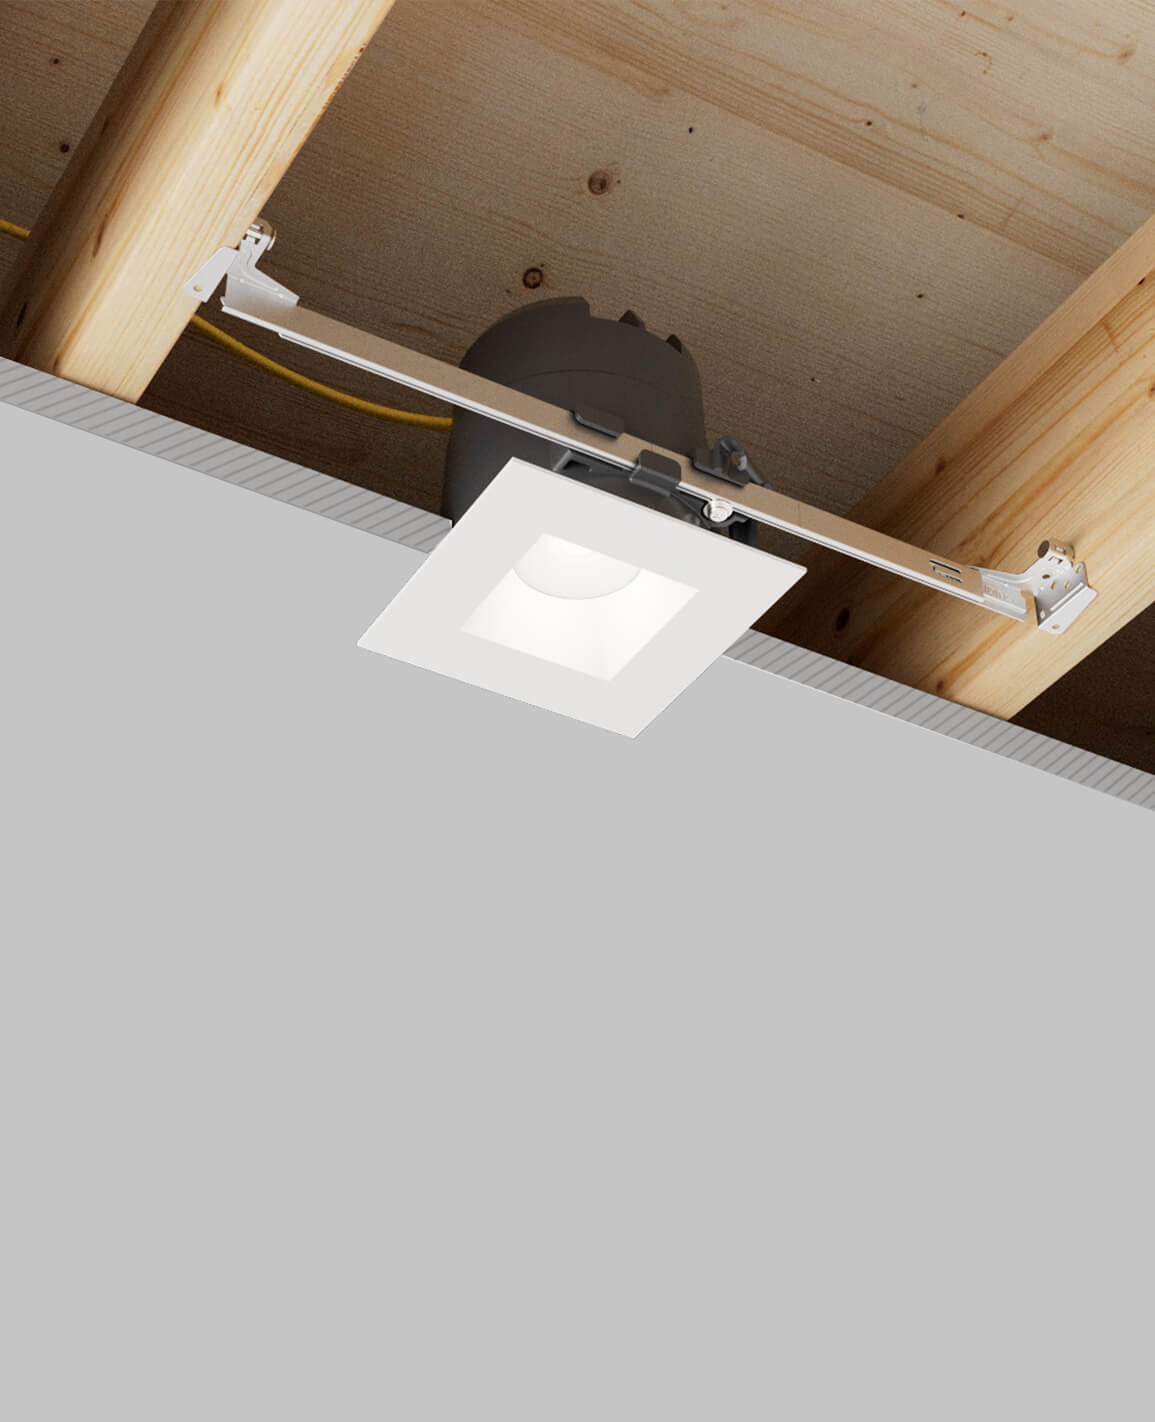 LUSA 4" recessed light with bar hangers housing and white square trim